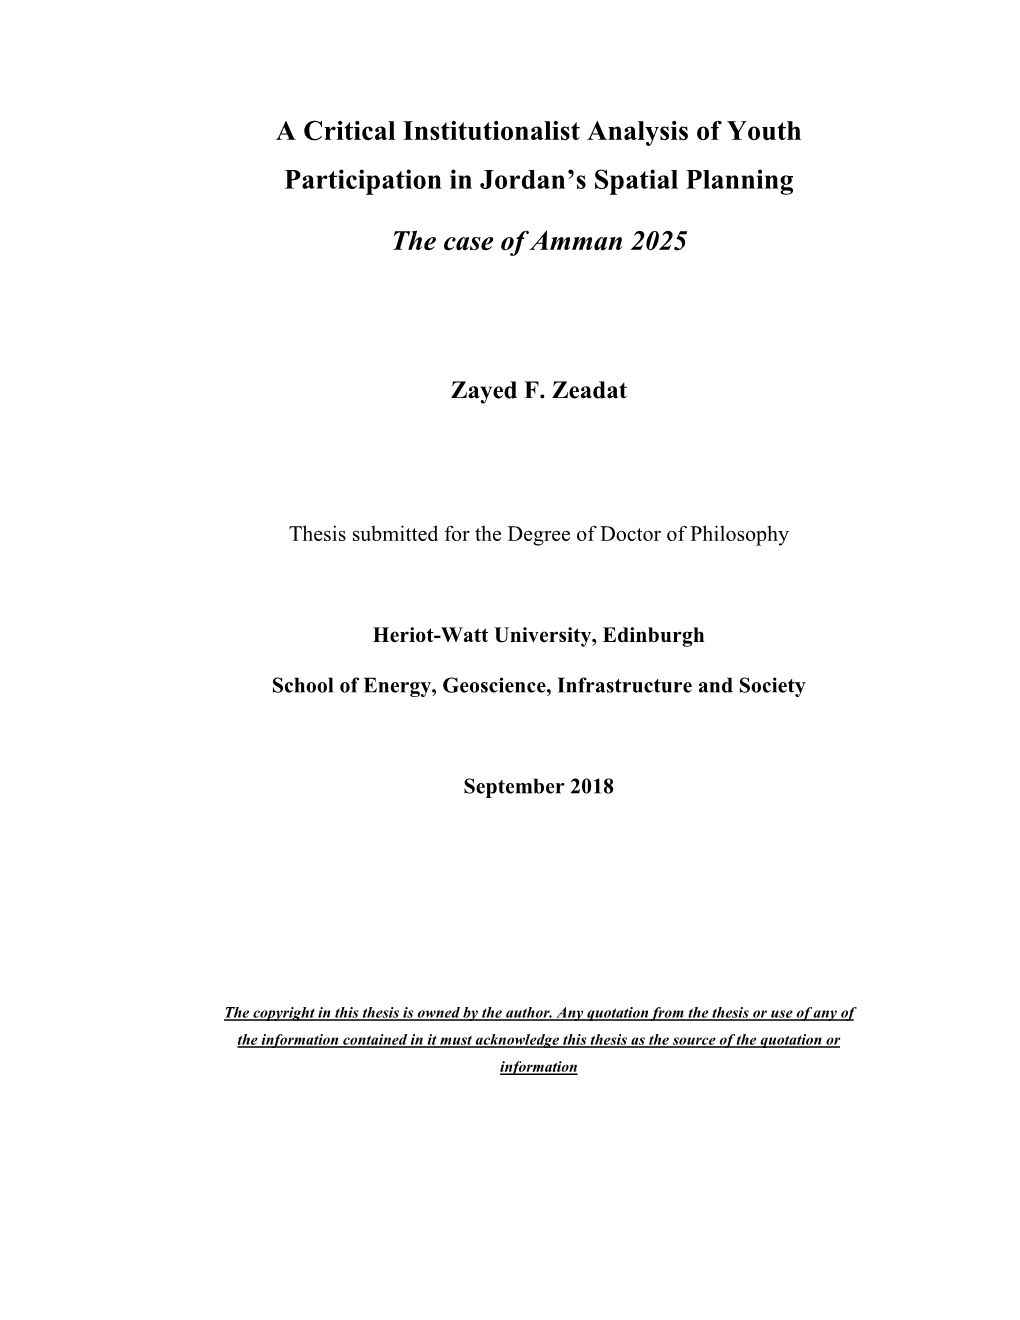 A Critical Institutionalist Analysis of Youth Participation in Jordan's